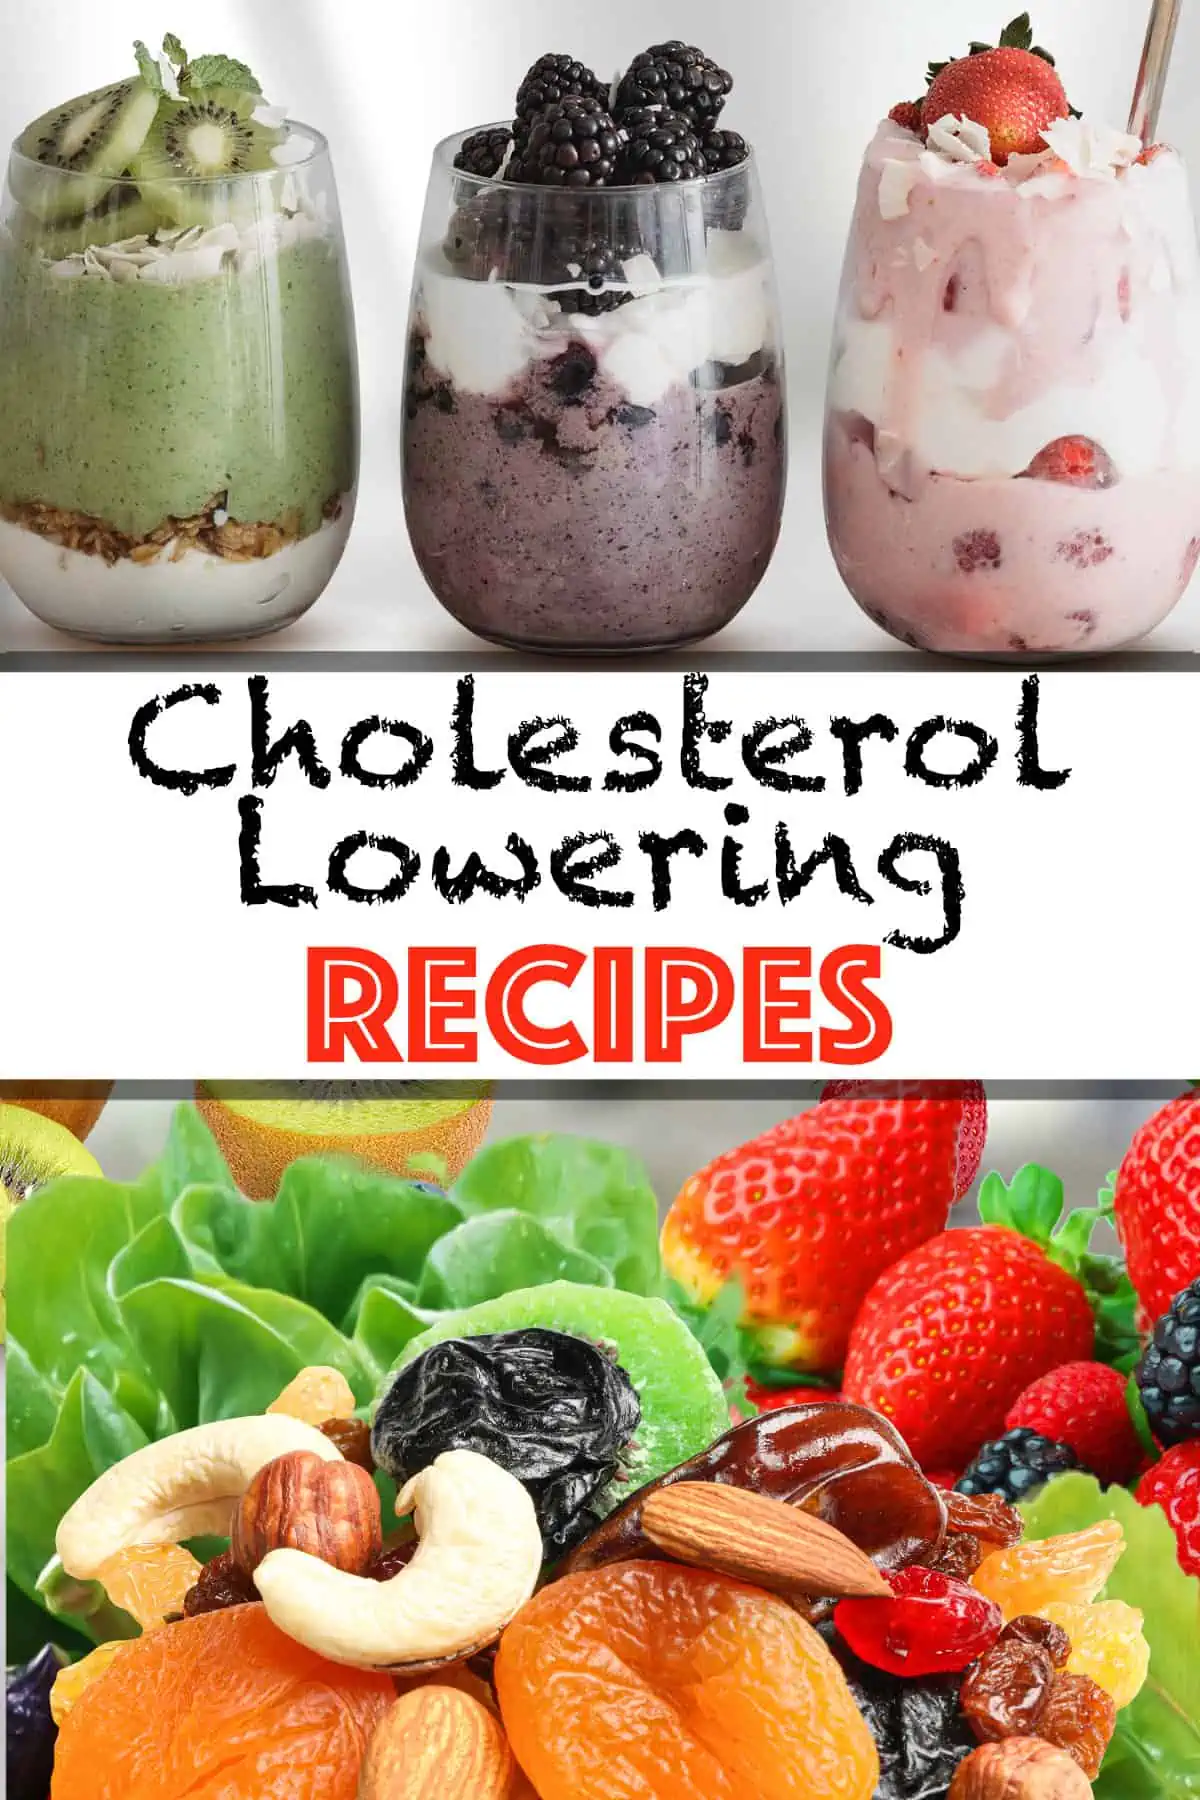 Cholesterol Lowering Smoothie Recipes